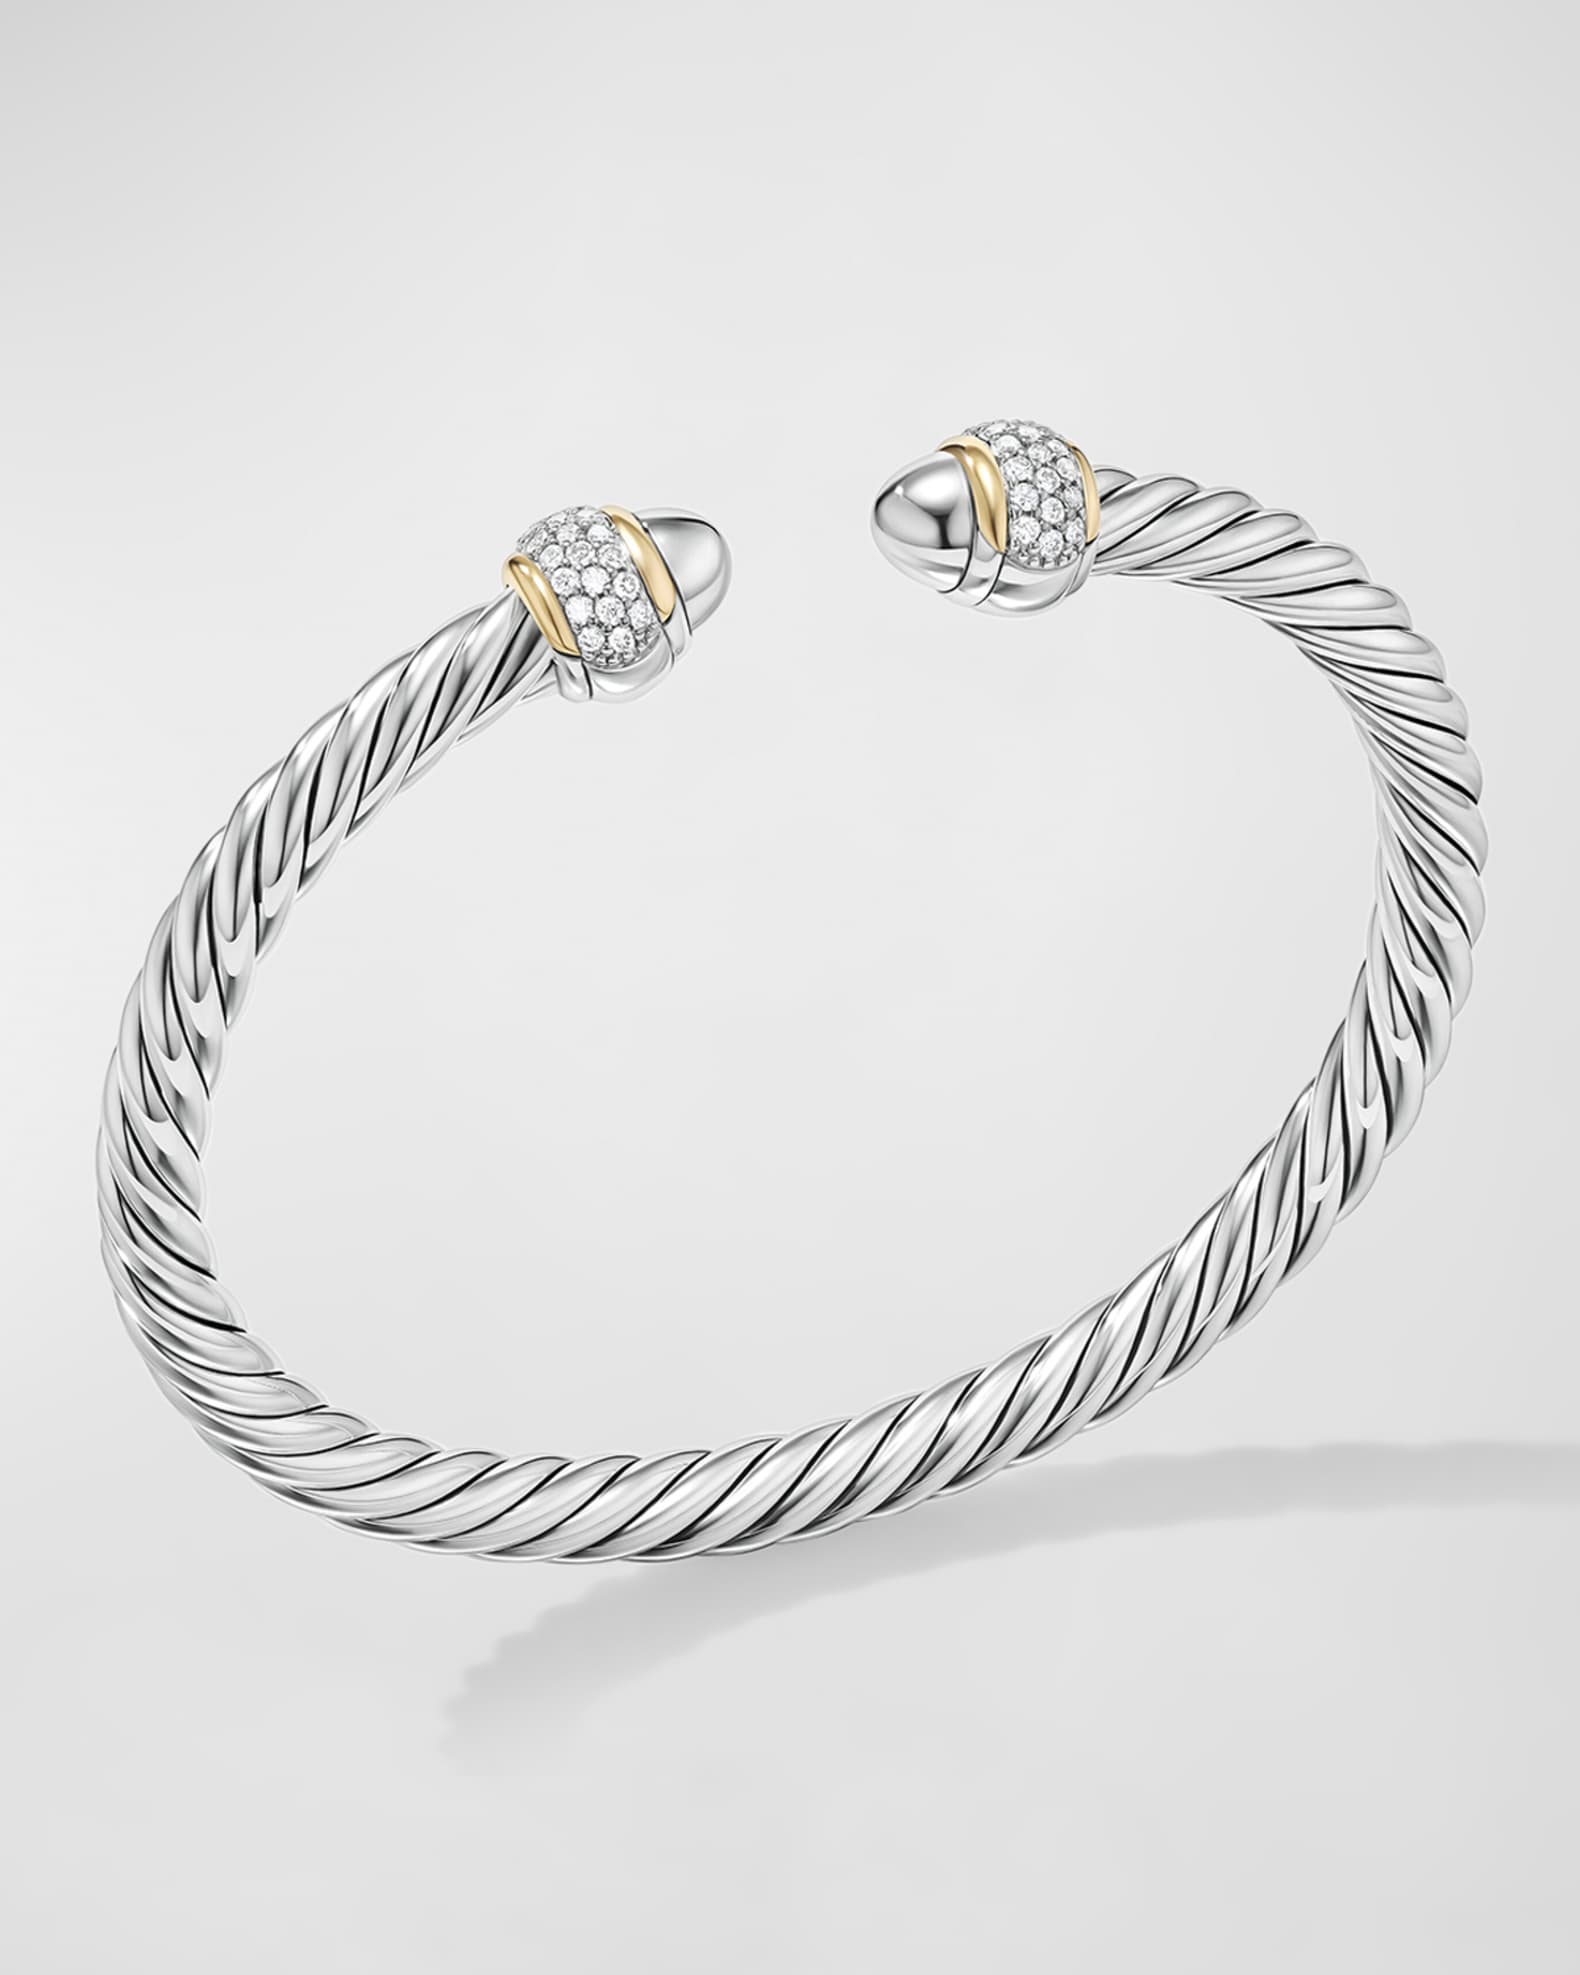 David Yurman Cable Bracelet with Diamonds in Silver and 18K Gold, 5mm ...